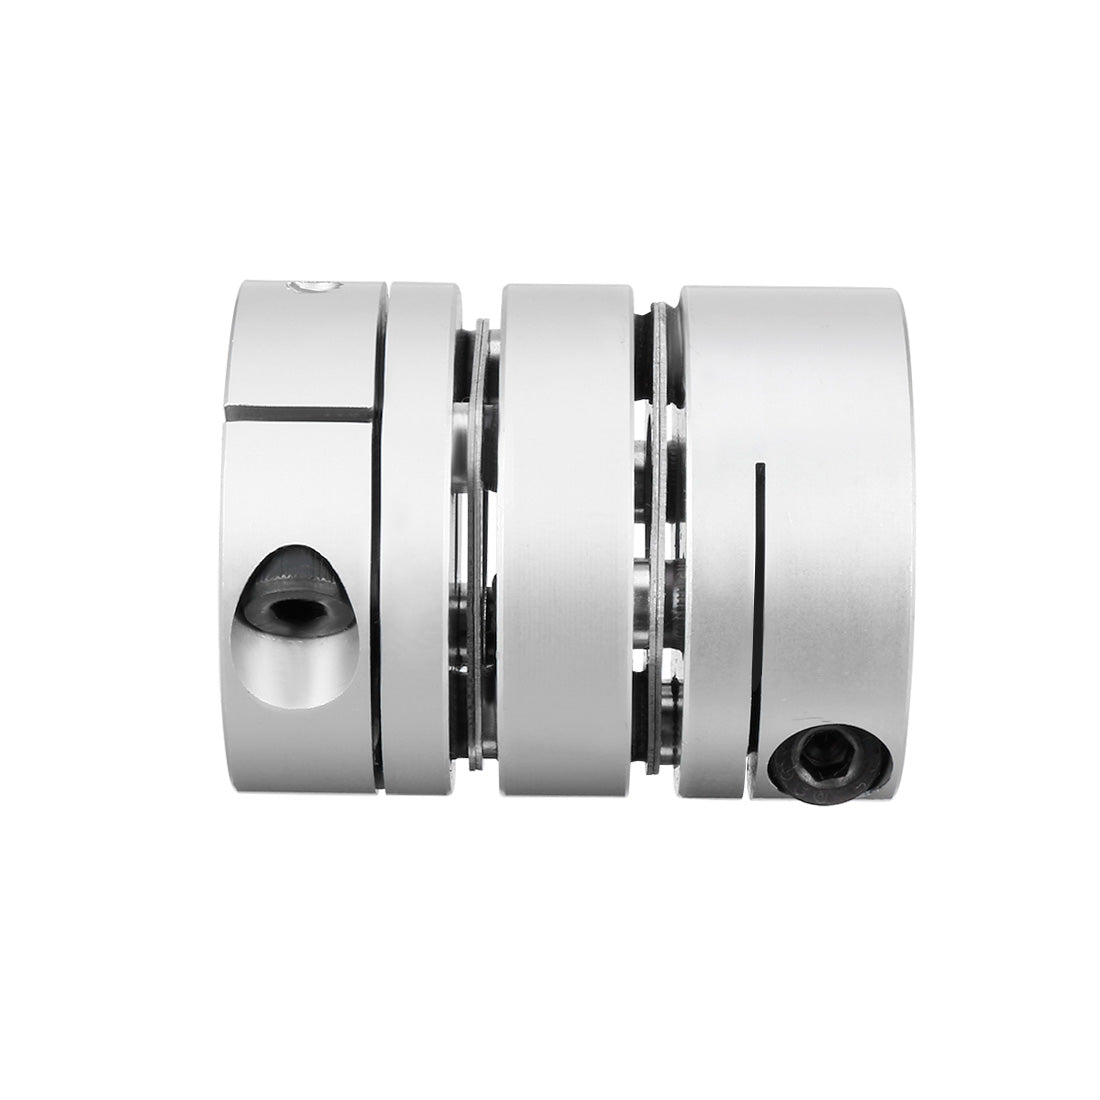 uxcell Uxcell 8mmx6.35mm Clamp Tight Motor Shaft 2 Diaphragm Coupling accoupler